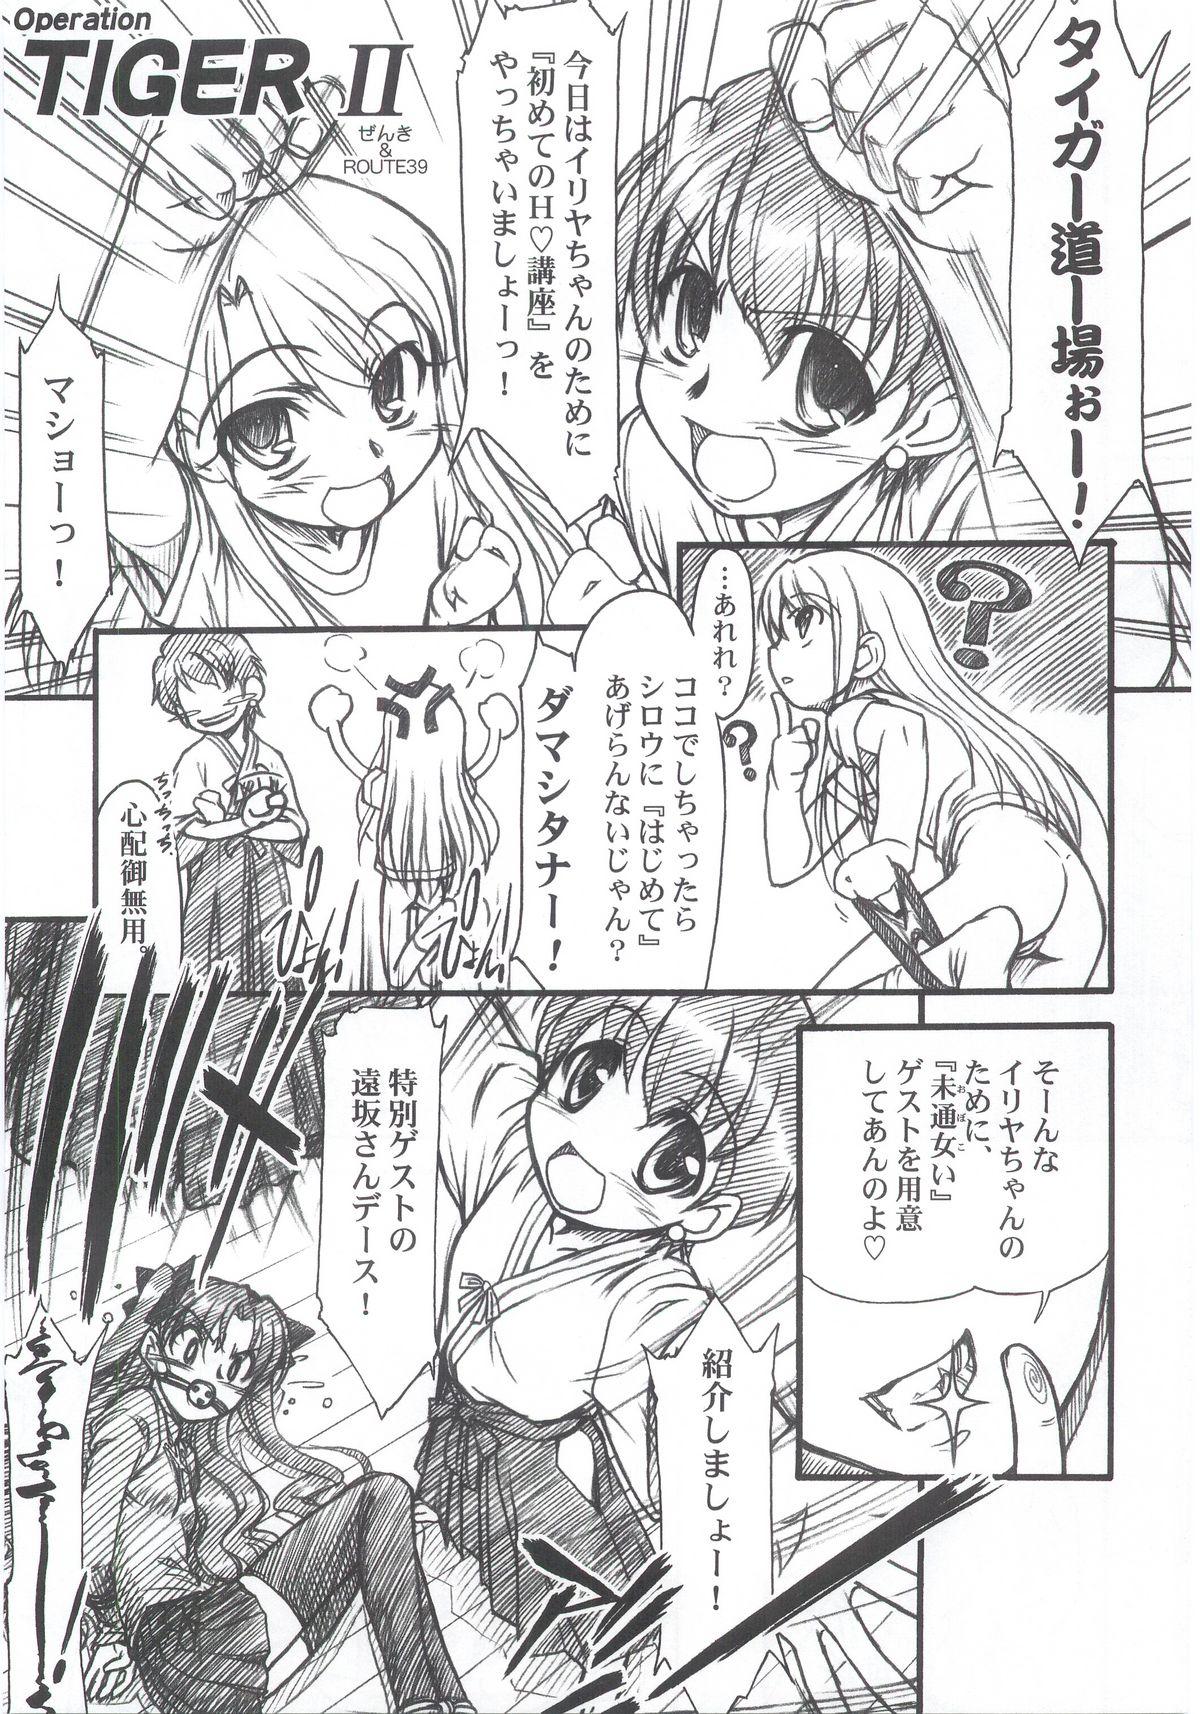 Mistress Fate/Over lord - Fate stay night Jap - Page 4